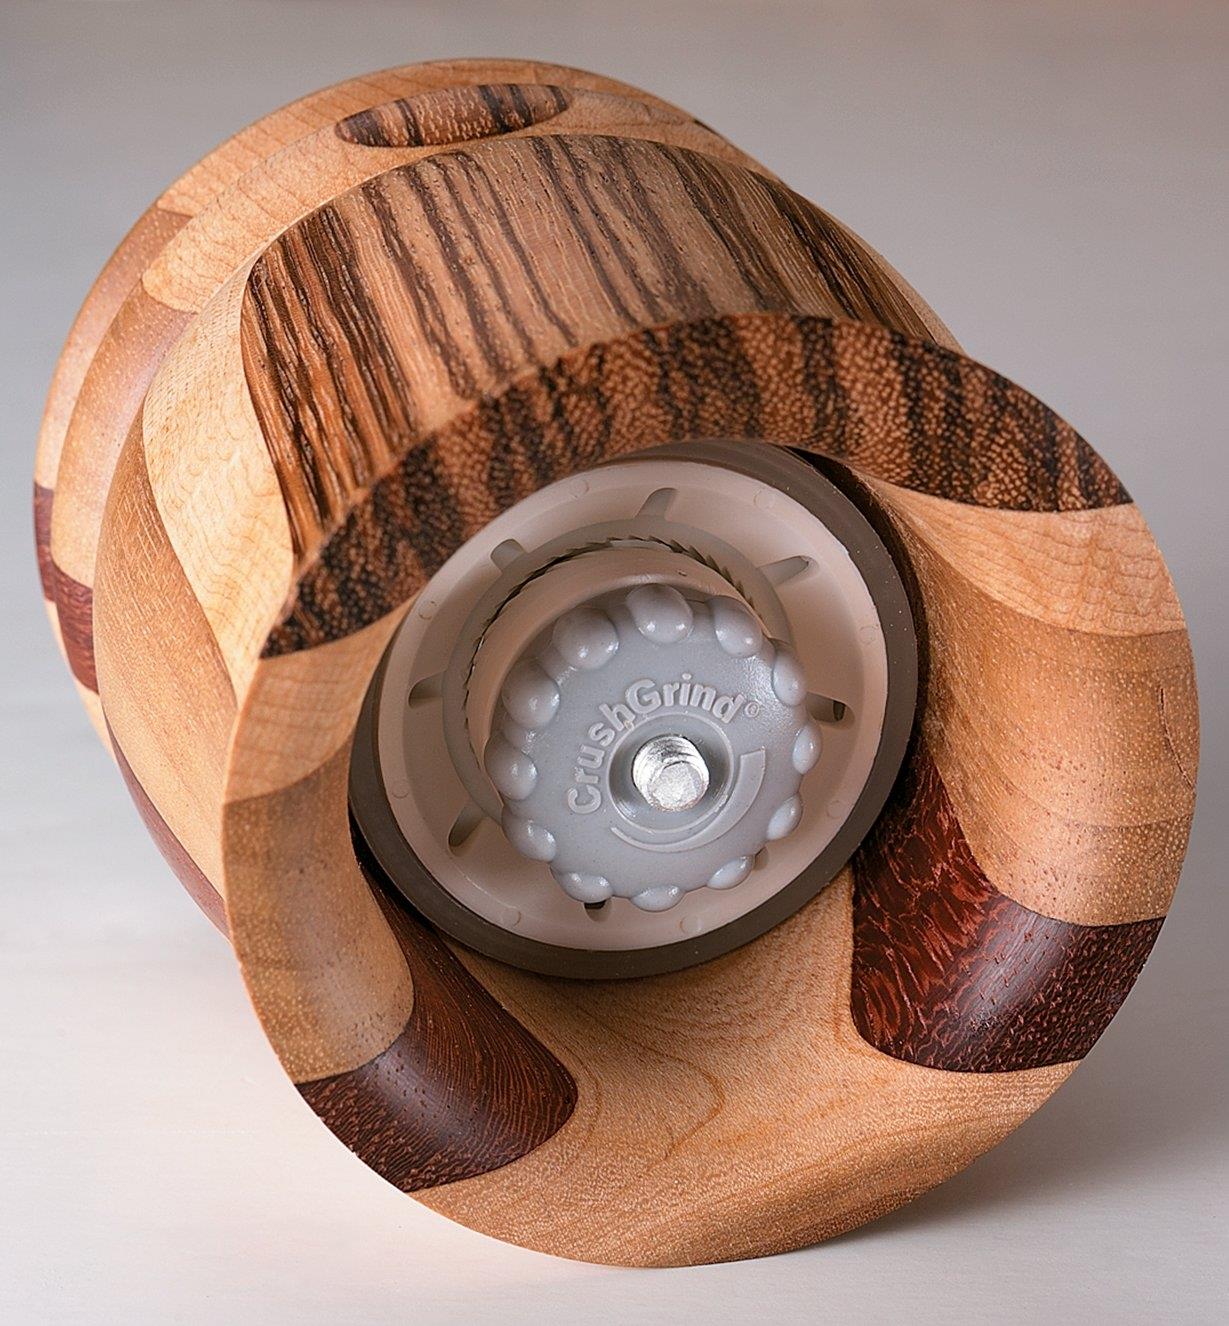 Bottom view of wooden pepper mill with mechanism installed